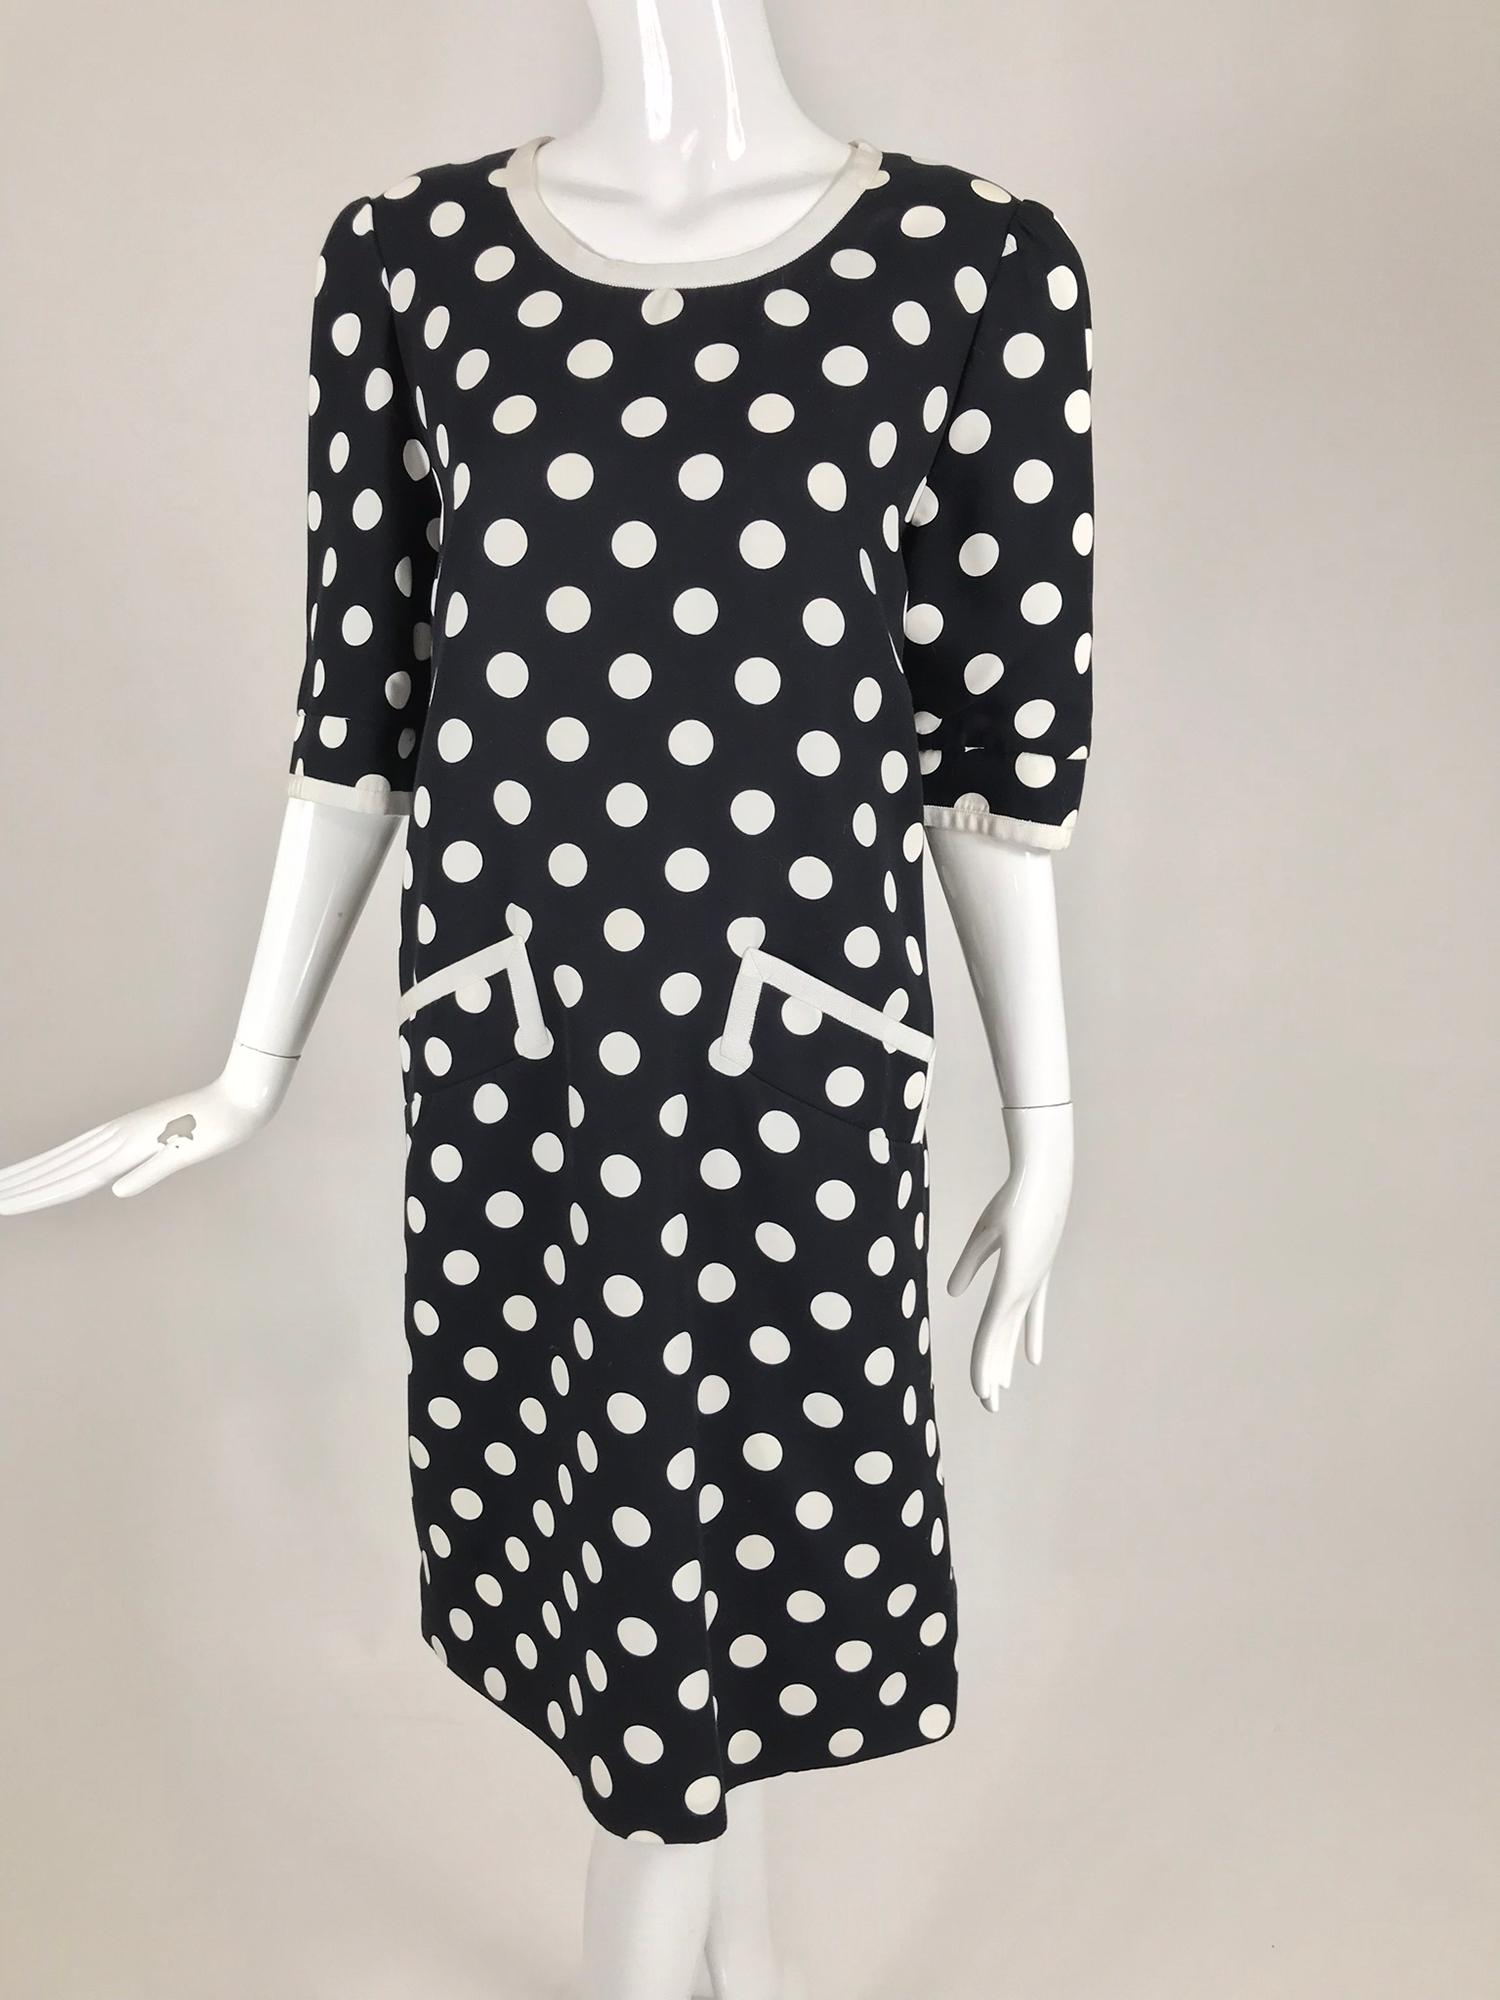 Givenchy Couture Black and White Cotton Polka Dot Day Dress 1980s For Sale 9